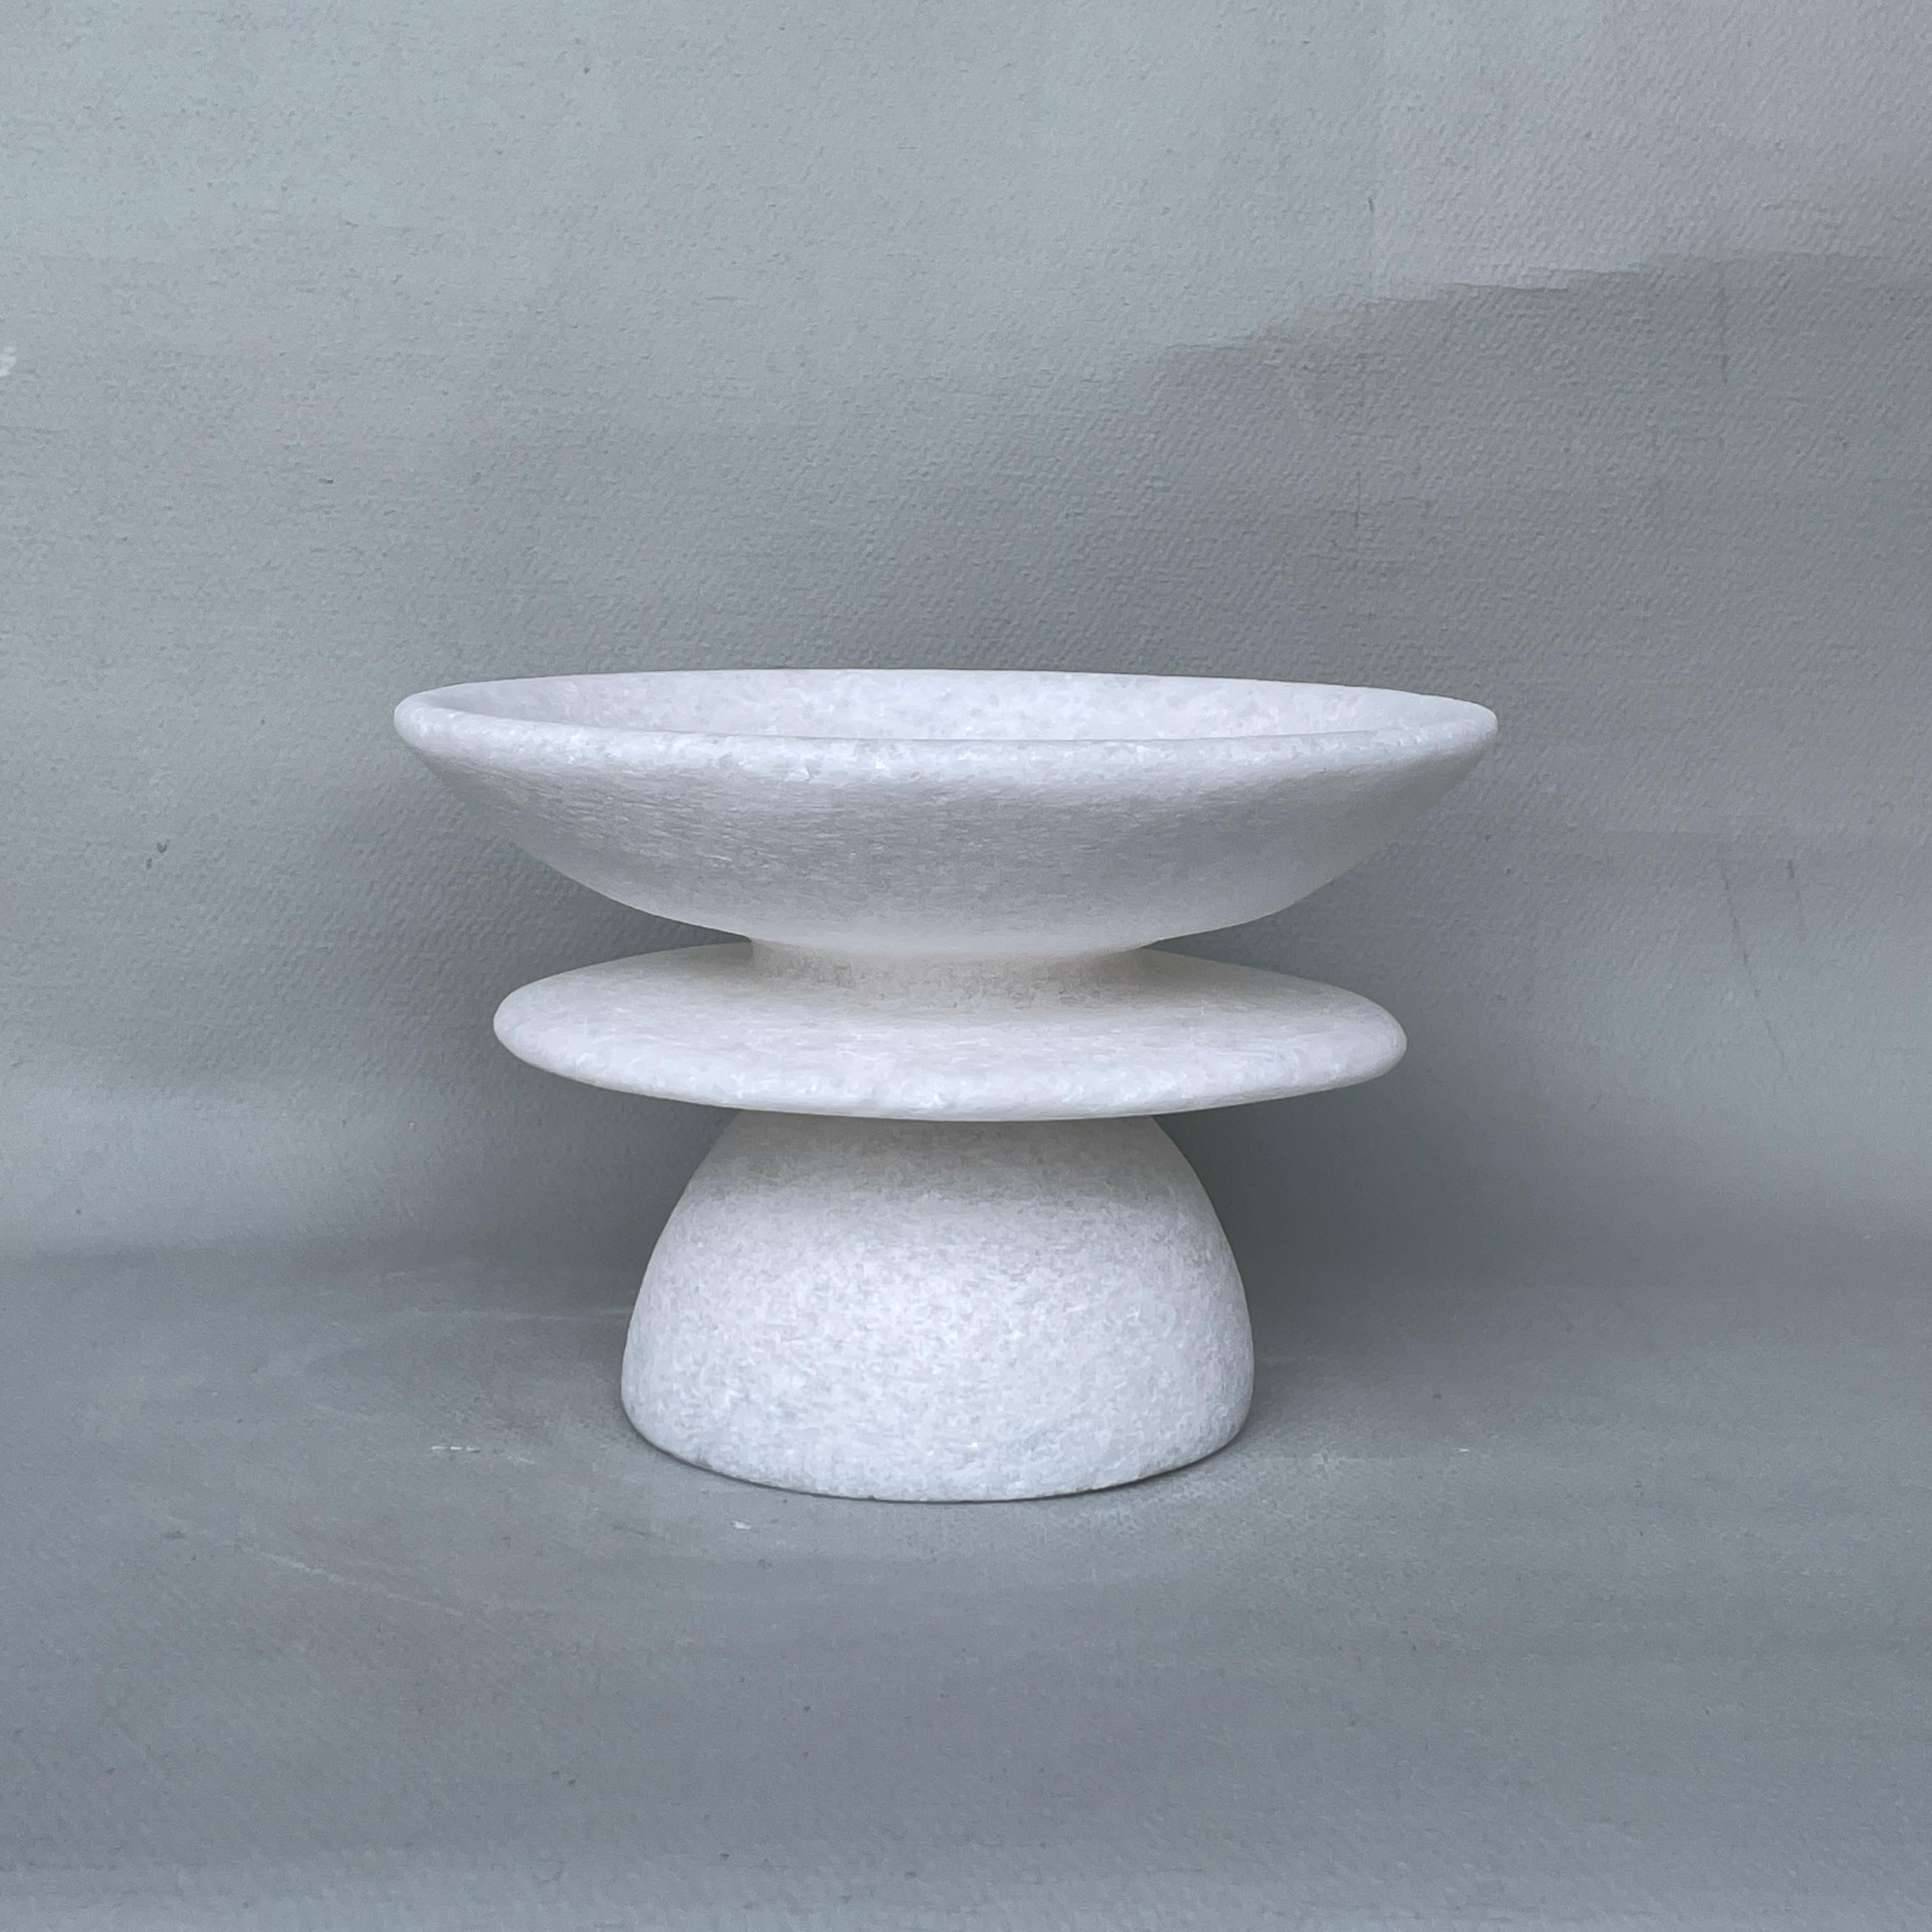 Unique Naxian Marble Vessel by Tom Von Kaenel
Unique piece.
Dimensions: Ø 17.5 x H 12 cm.
Materials: Naxian marble.

The surfaces of the objects are not sealed, they are not protected against acid. The lines of the handcraft are visible it